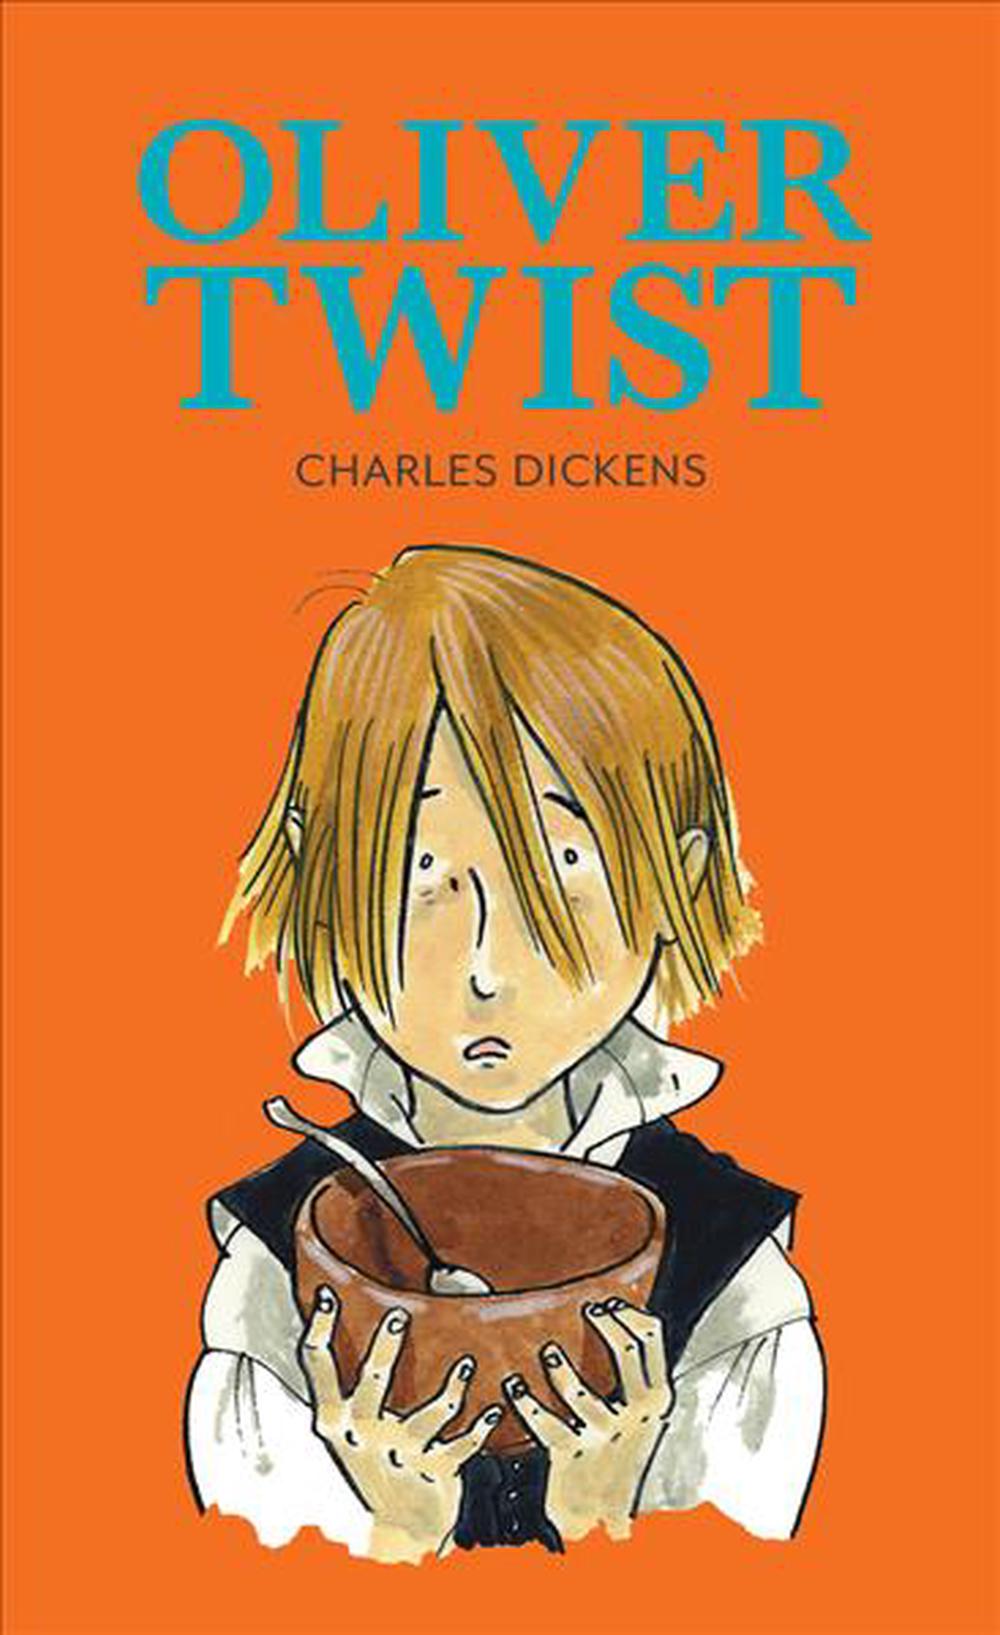 book review for oliver twist